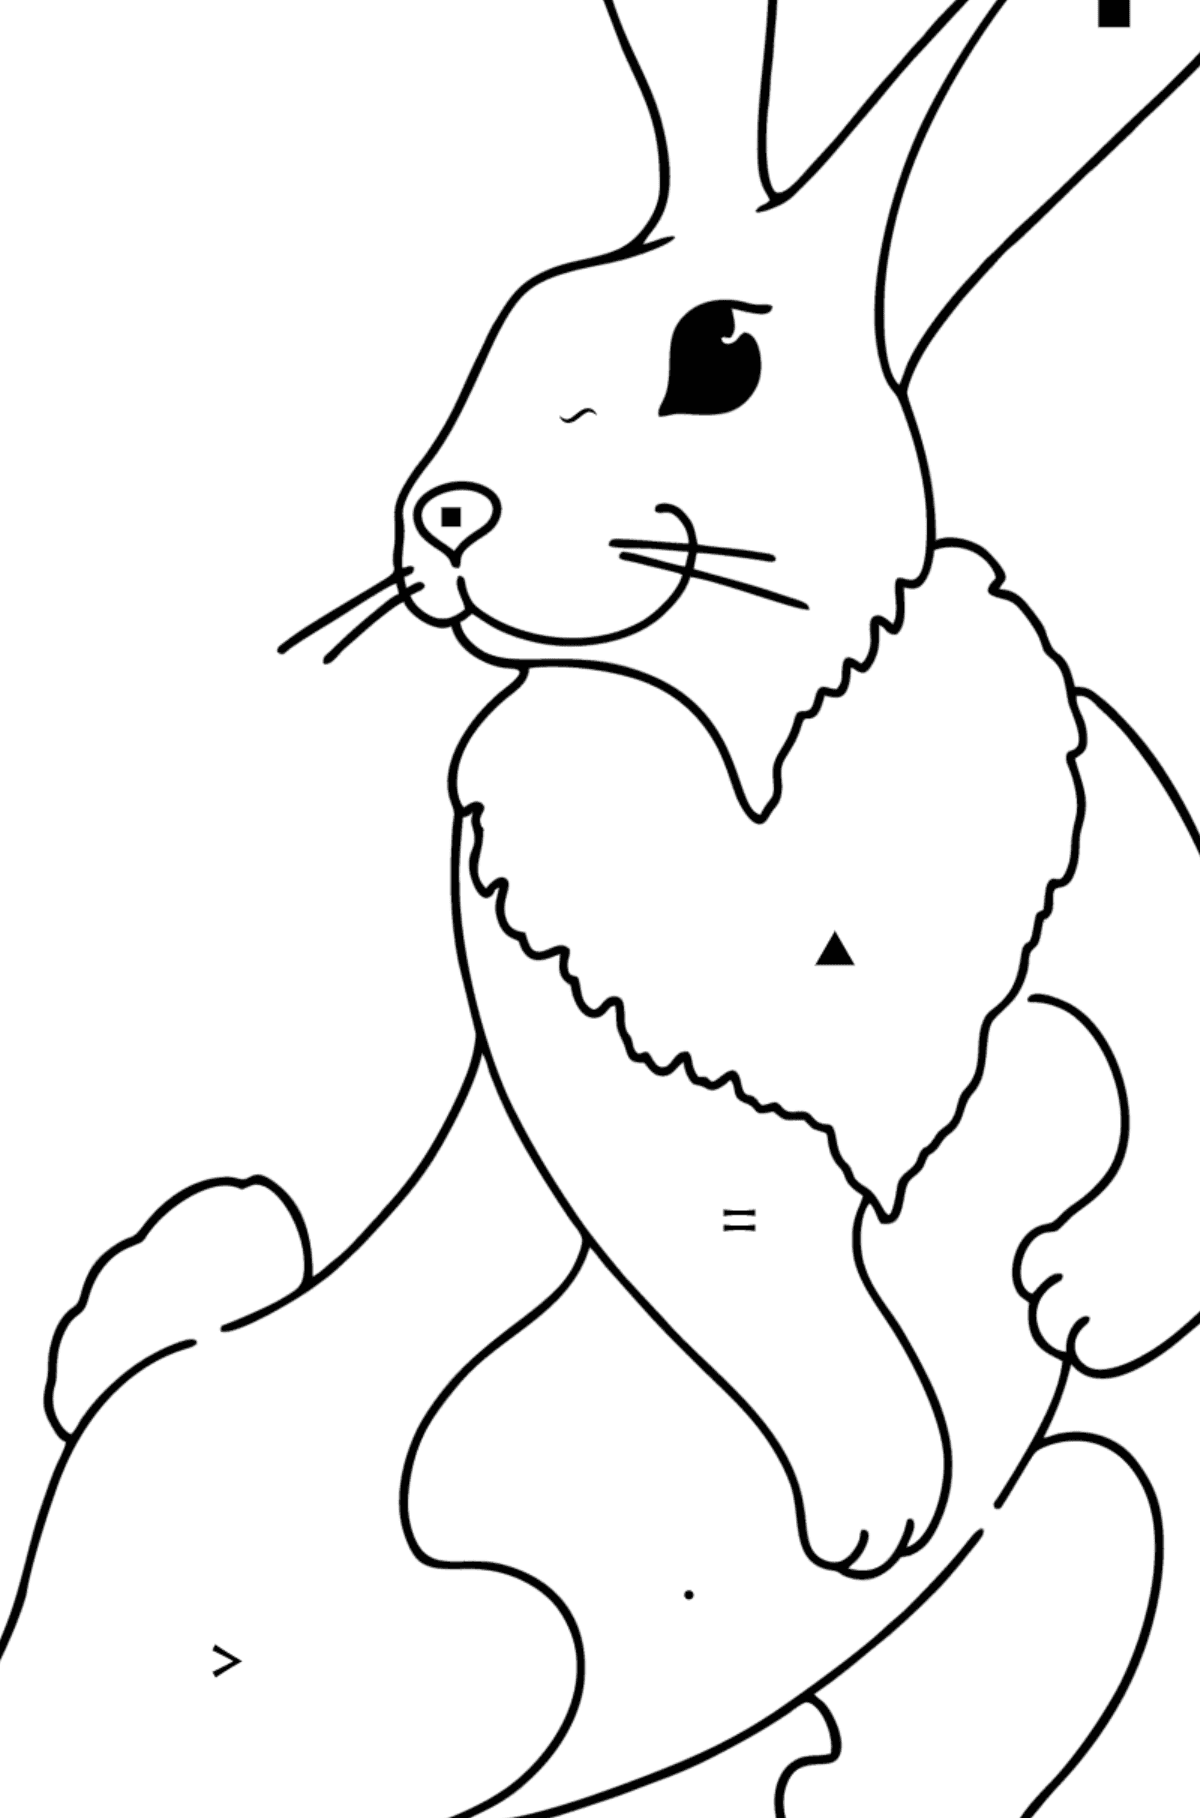 Playful Bunny coloring page - Coloring by Symbols for Kids